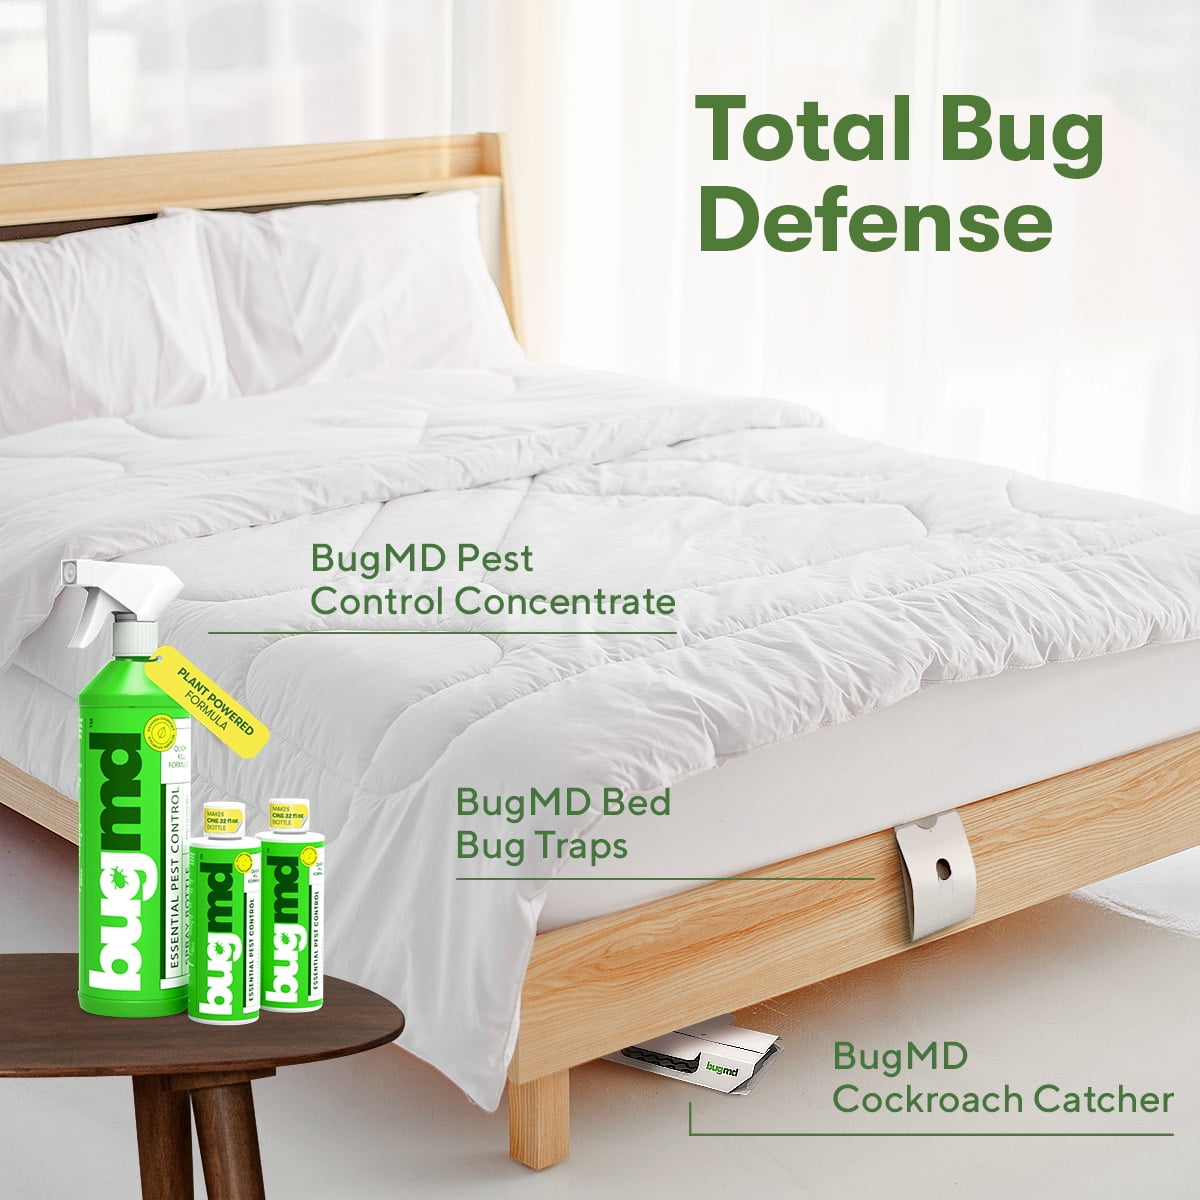  BugMD Mosquito Amigo Natural Plant-Based Pest Control Spray, Kills Mosquitoes, Fleas & Ticks, Spiders, Ants, Insects and More, Treats  Up to 5,000 Square Feet